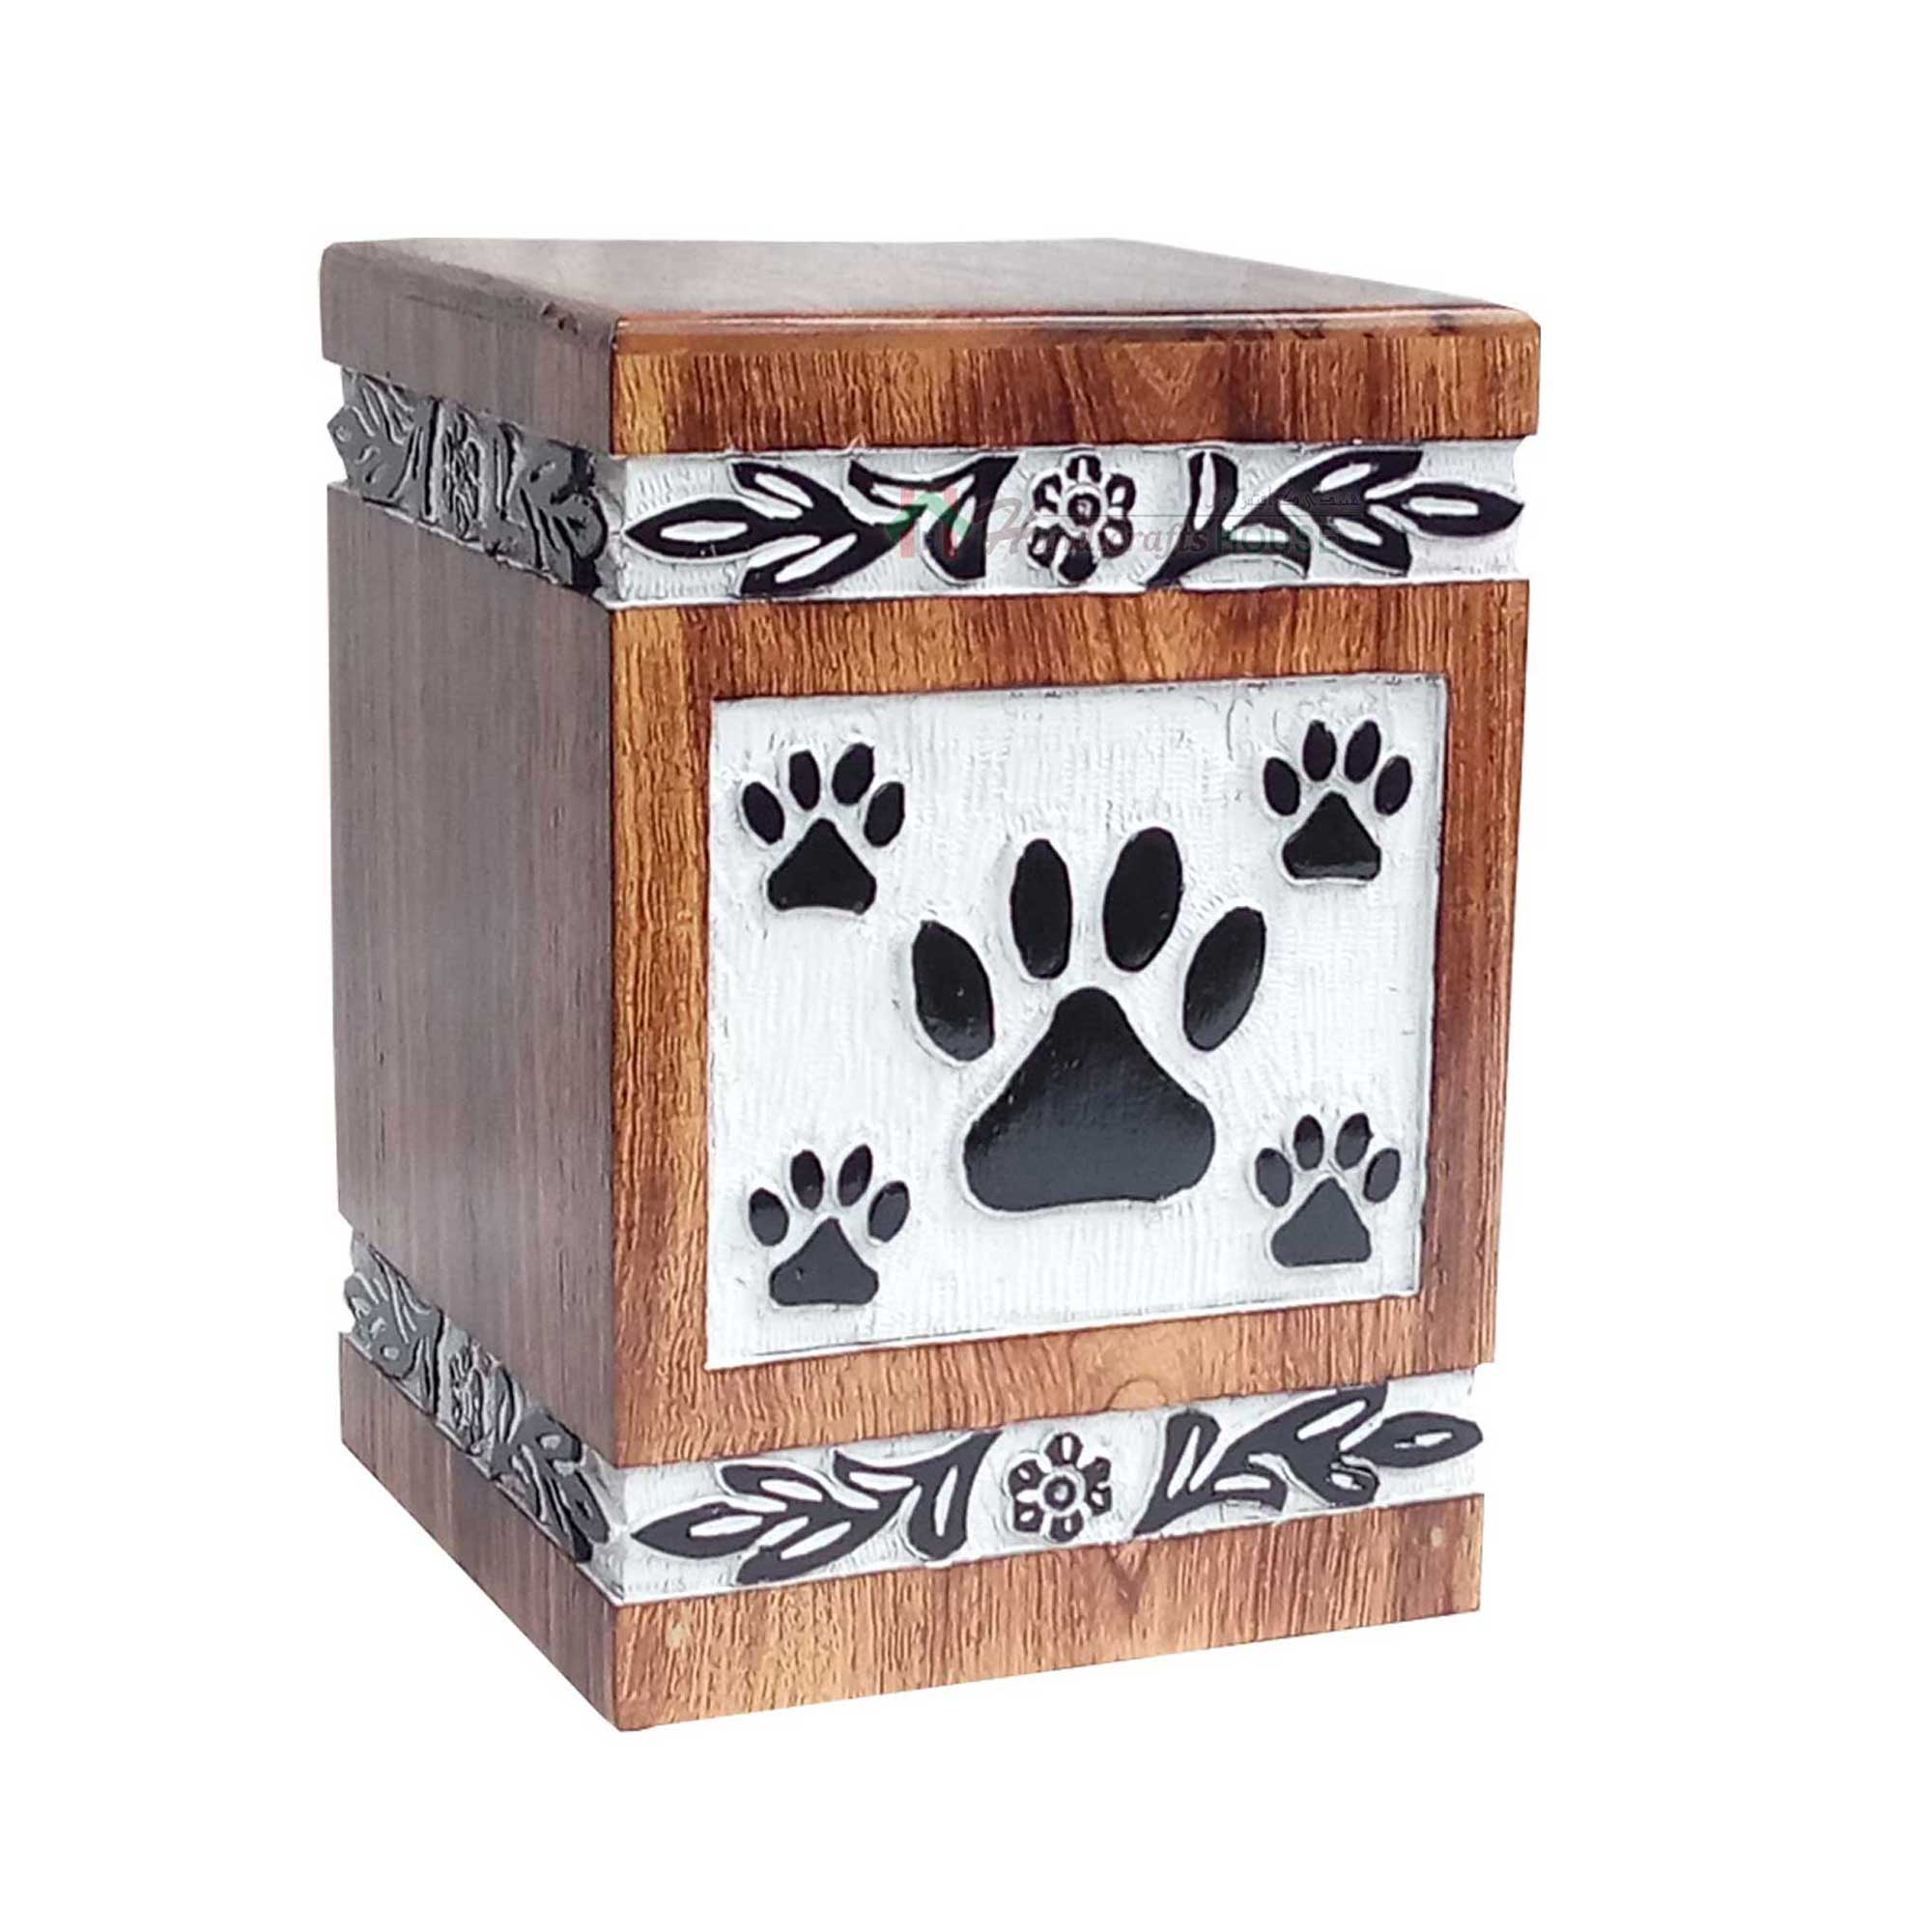 Wooden Box For Pet Ashes, Memorials Keepsake Wood Urns, Funeral Cats Urns, Burial Boxes